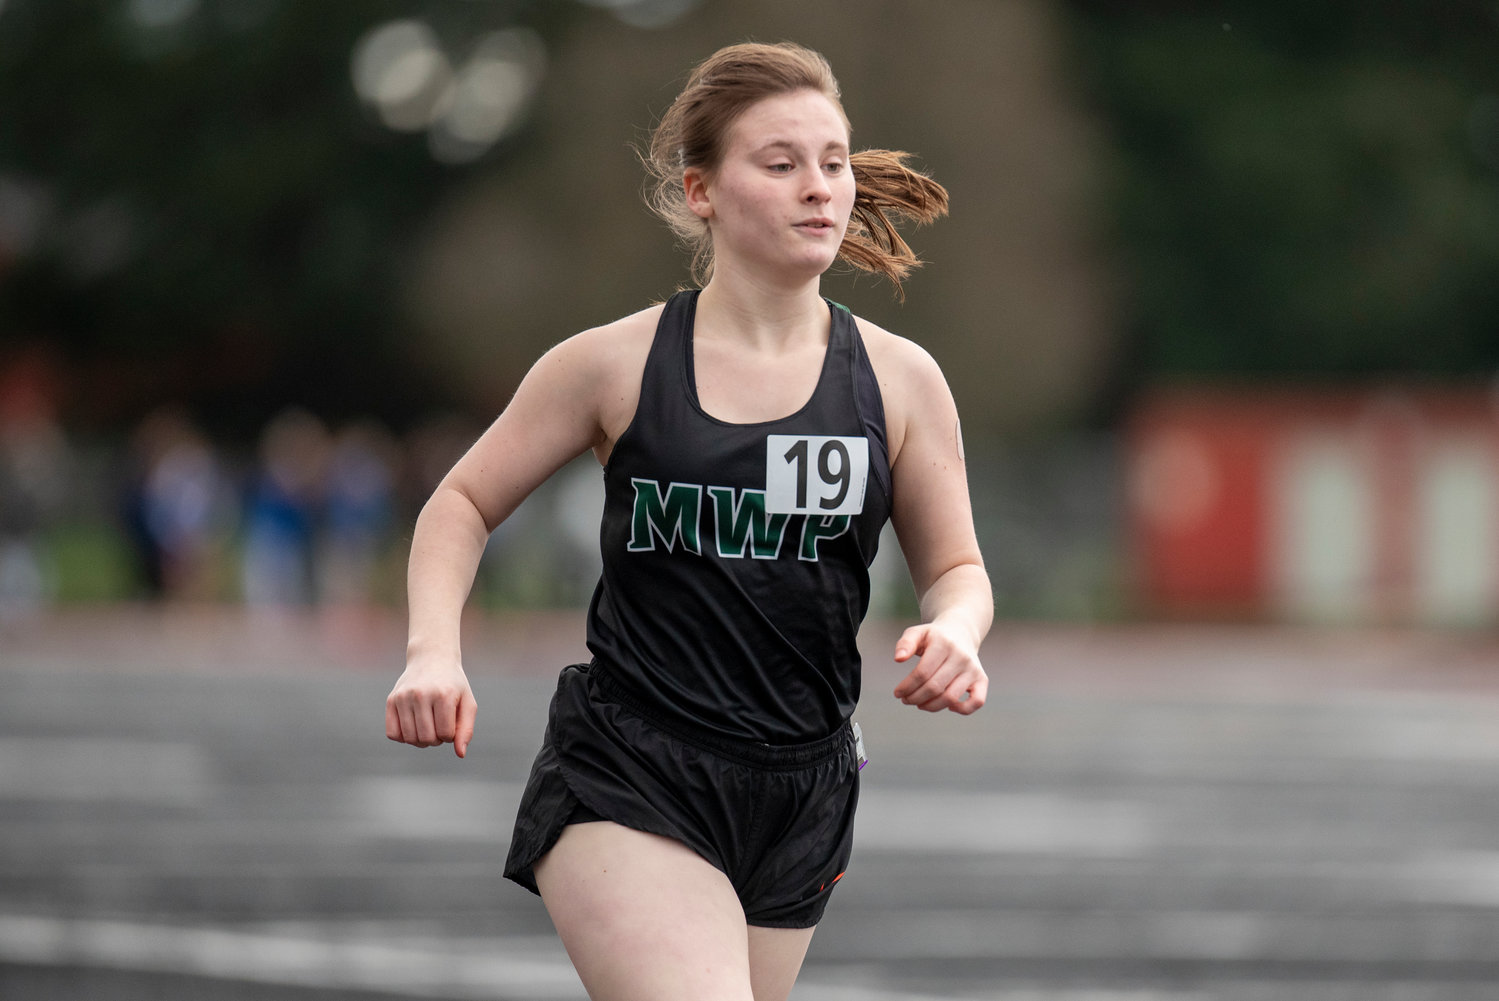 Morton-White Pass' Ayricka Hughes races in the girls 3200-meter run during a meet in Tenino on March 29.